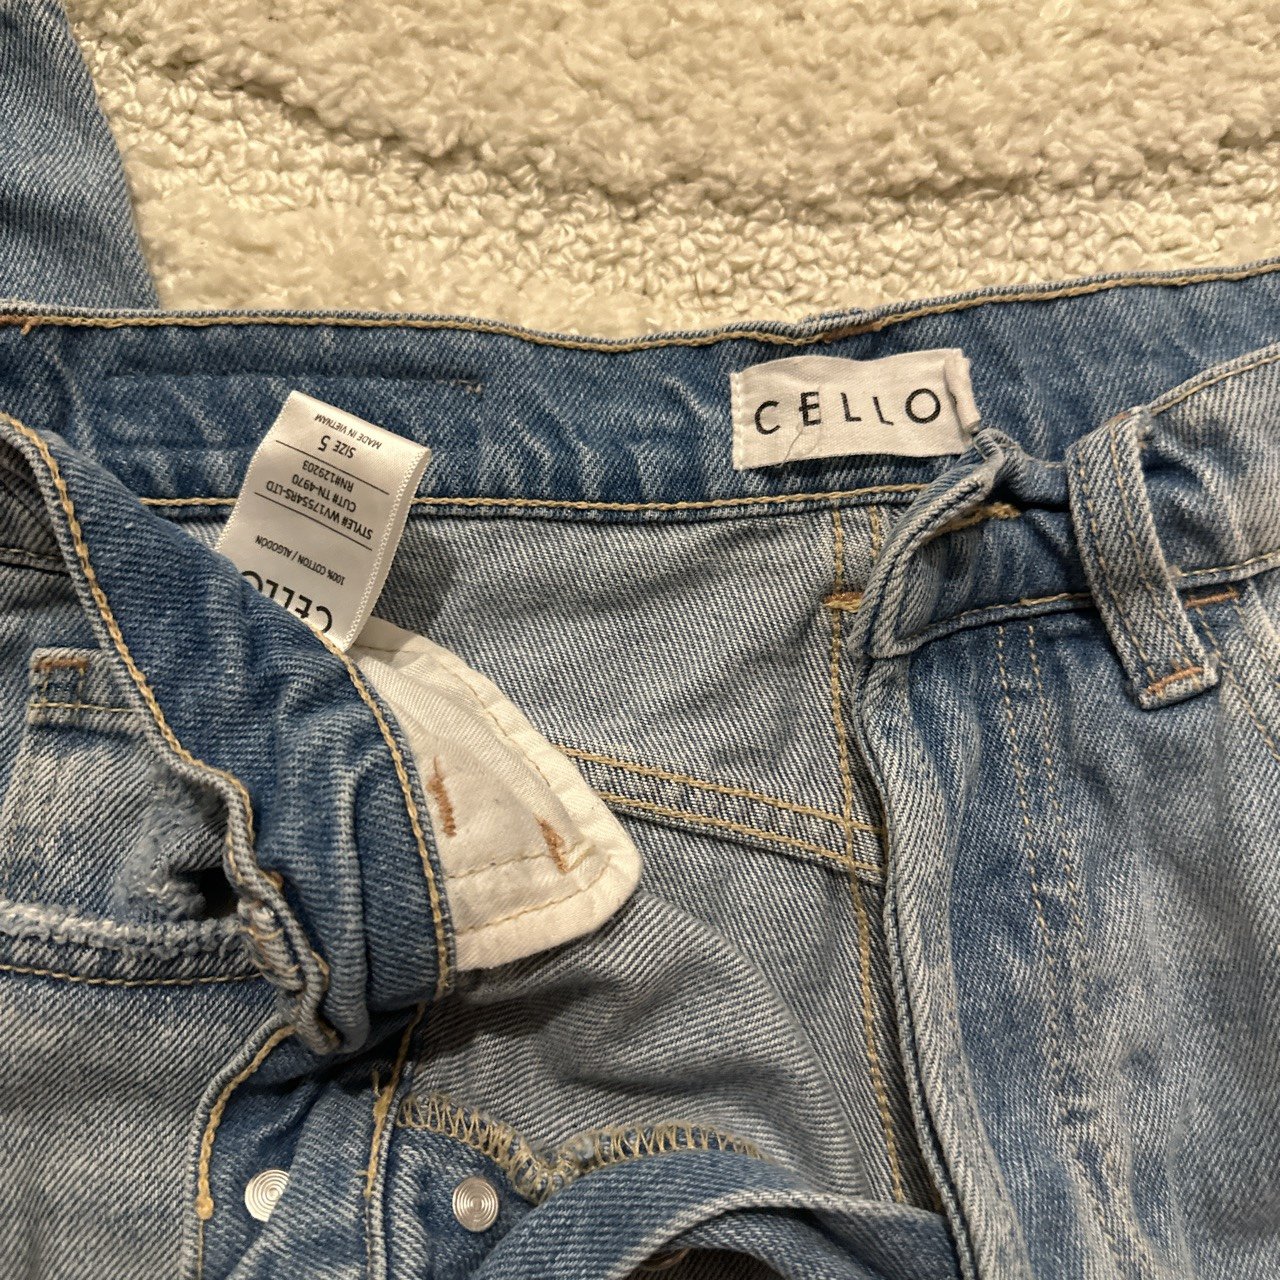 large discount cello jeans oMyh3W38M US Sale